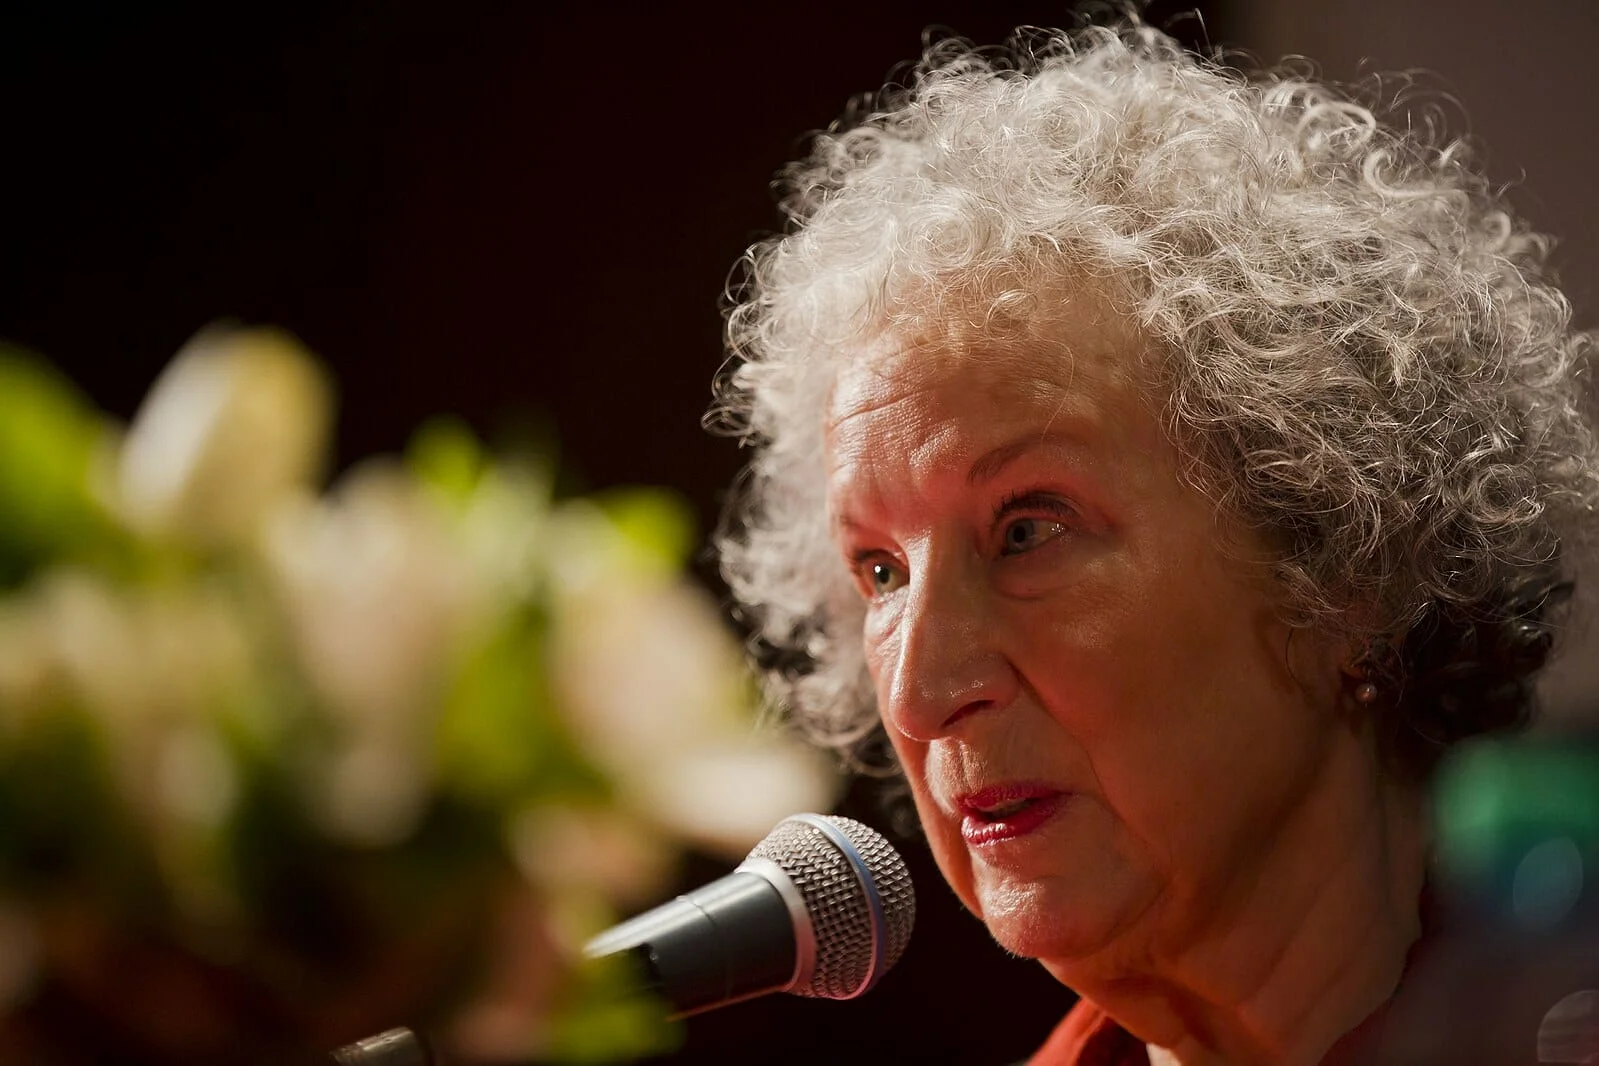 Margaret Atwood | From the origins to a dystopian future